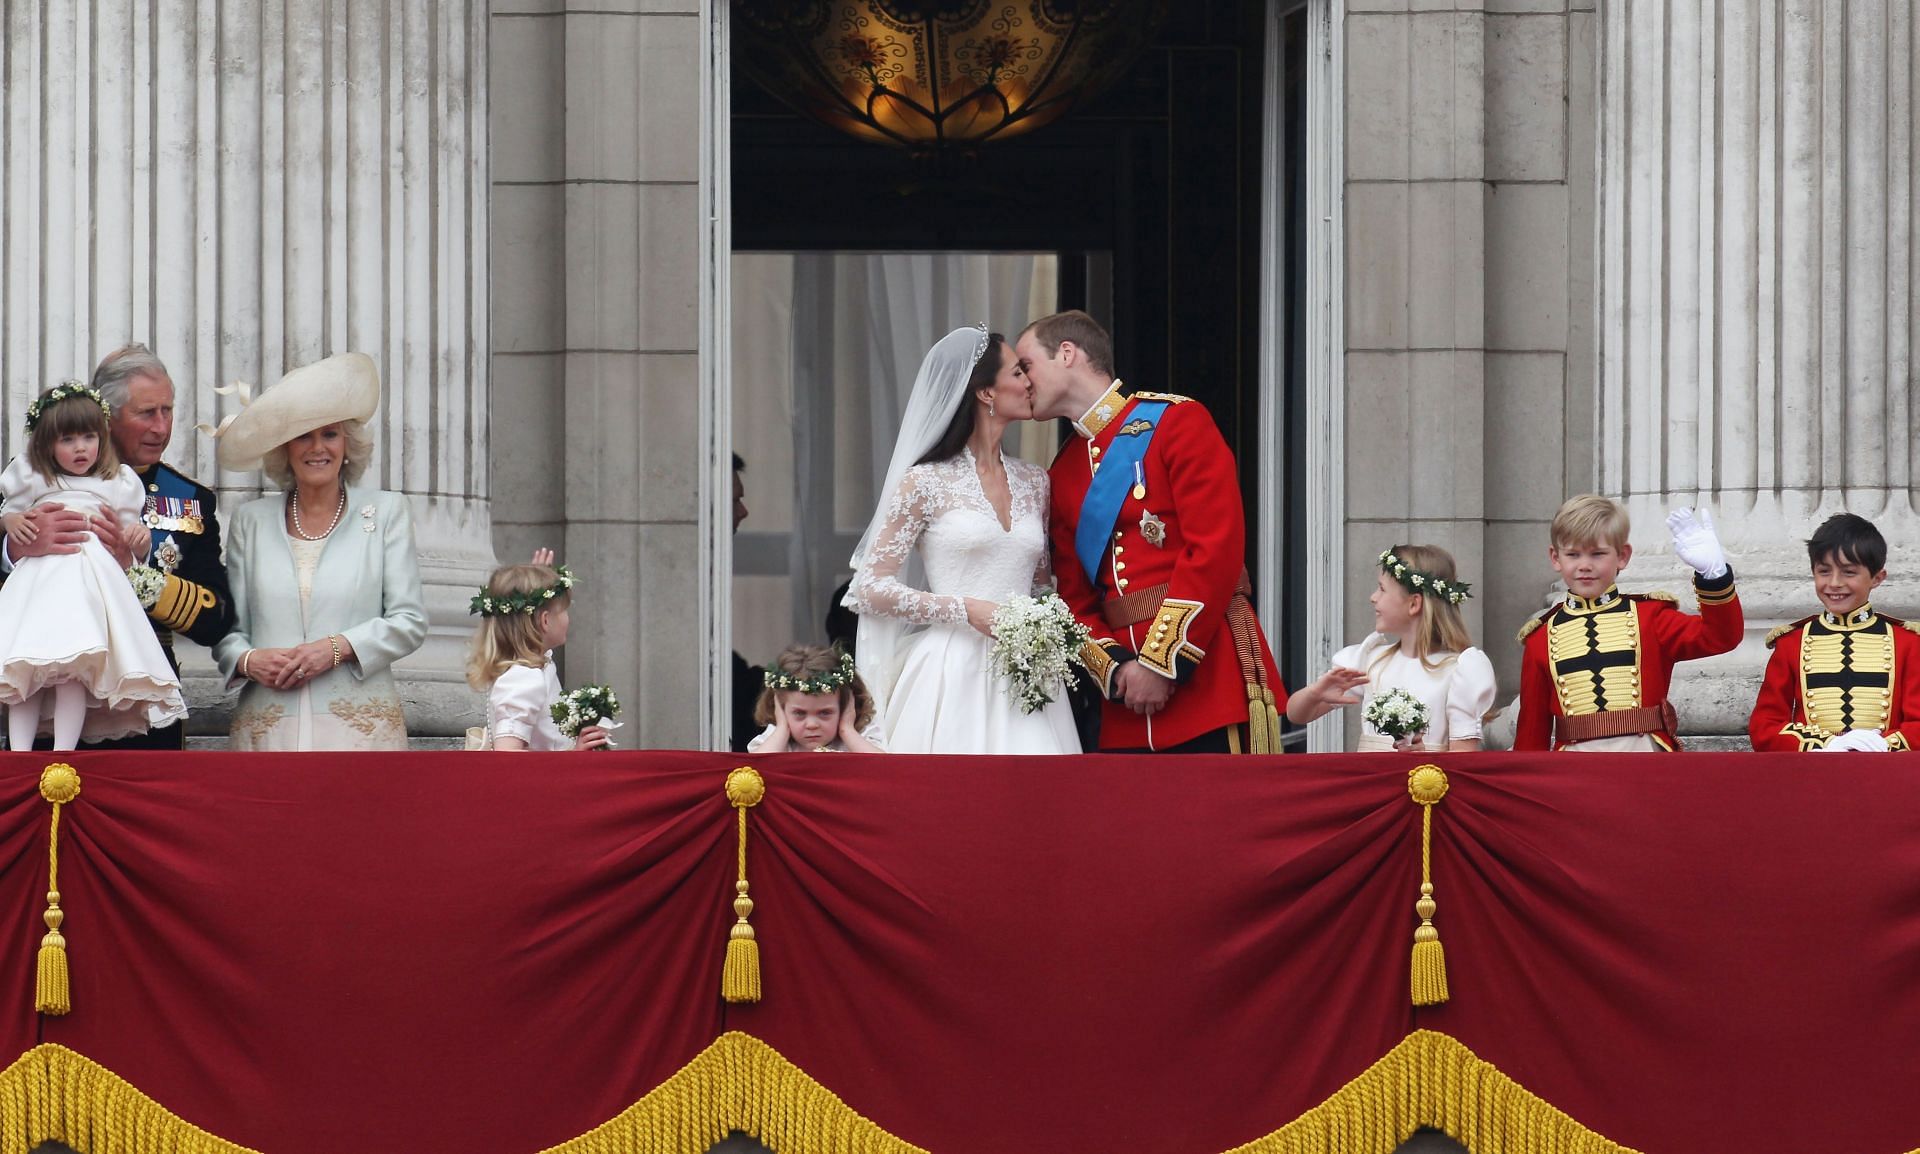 Royal Highnesses Prince William, Duke of Cambridge, and Catherine, Duchess of Cambridge kiss on the balcony at Buckingham Palace (Source: Getty)